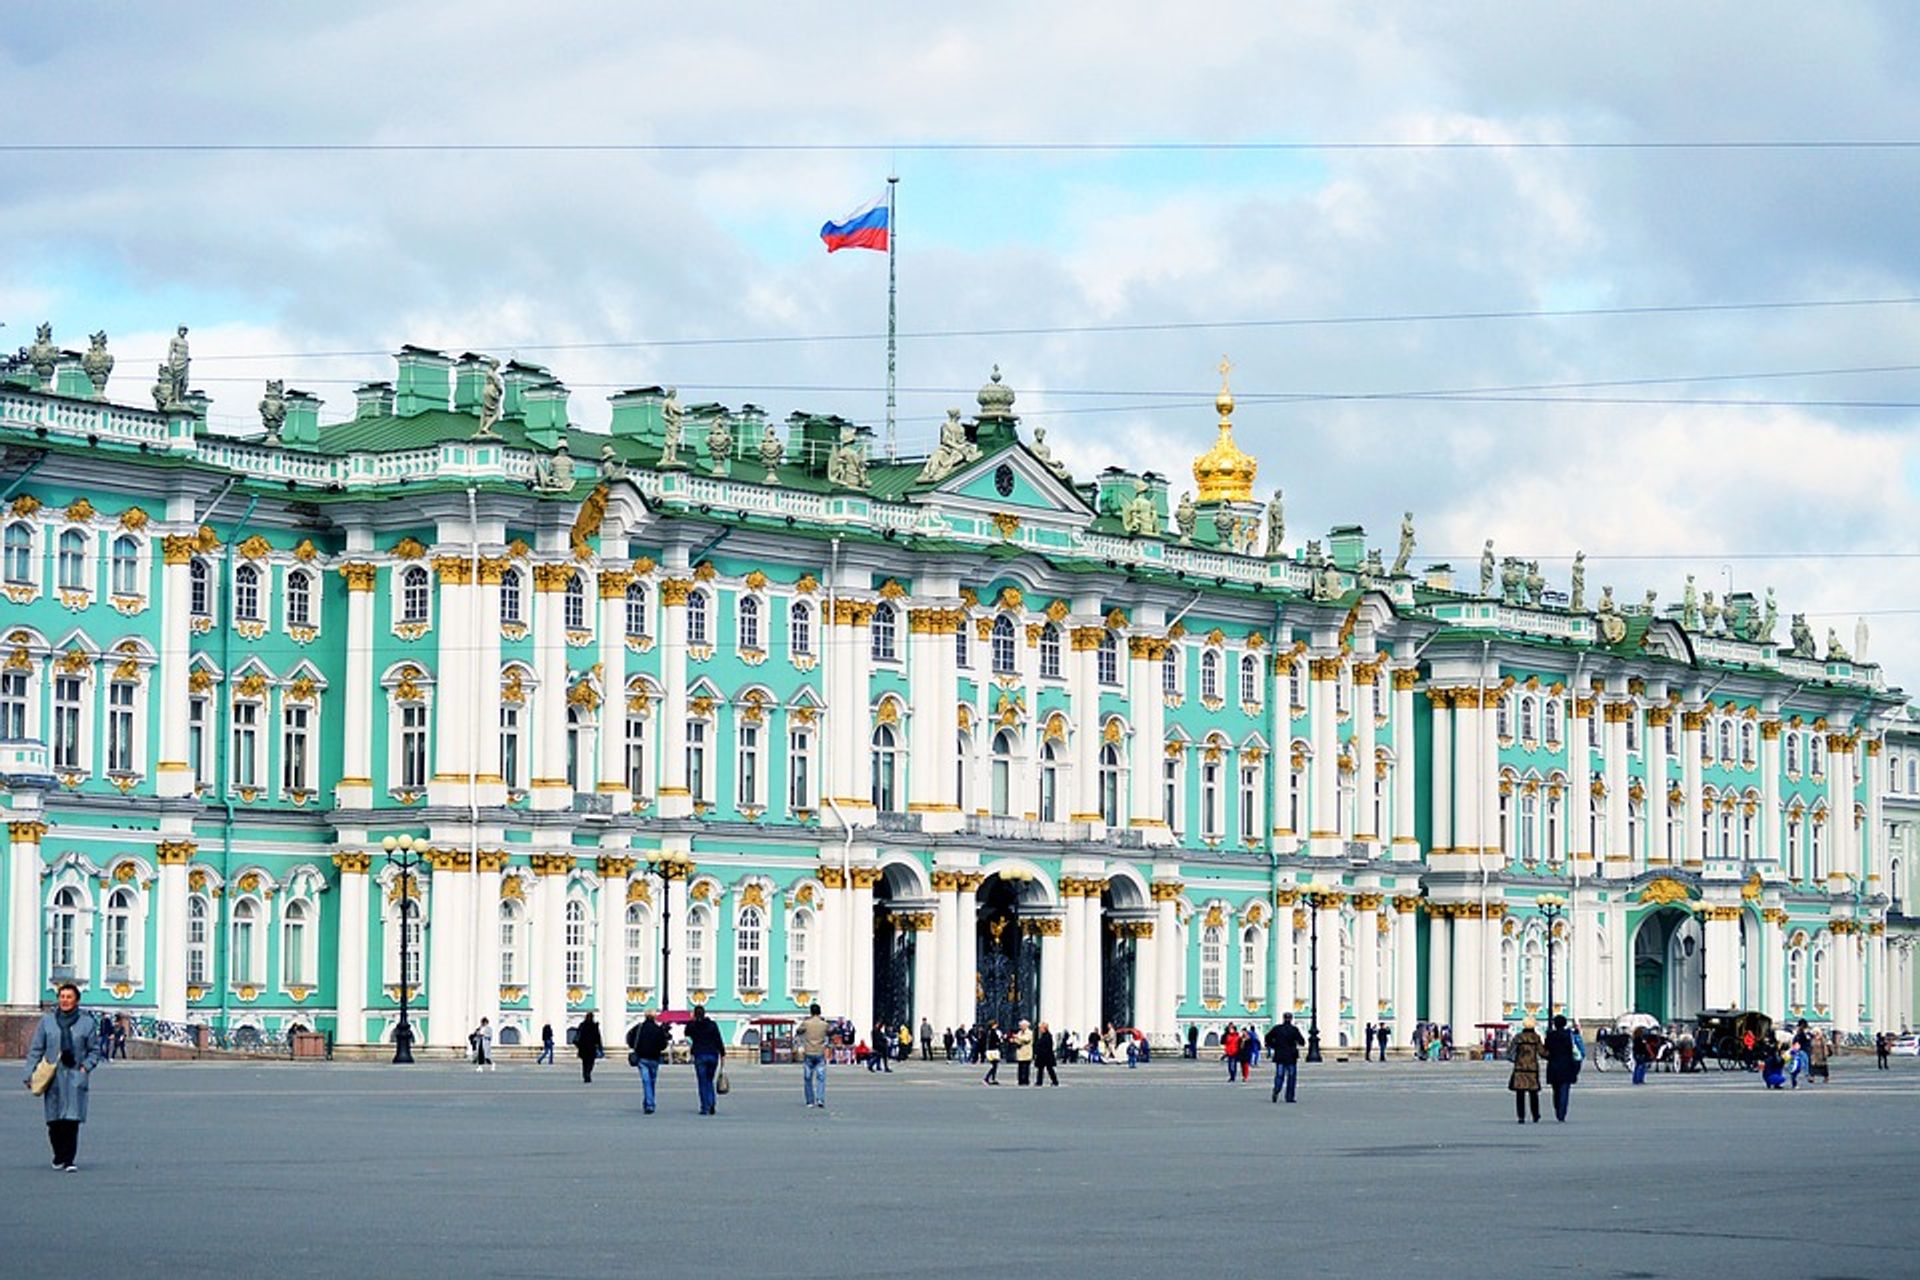 The State Hermitage Museum is curating the Russian Pavilion at the Venice Biennale 